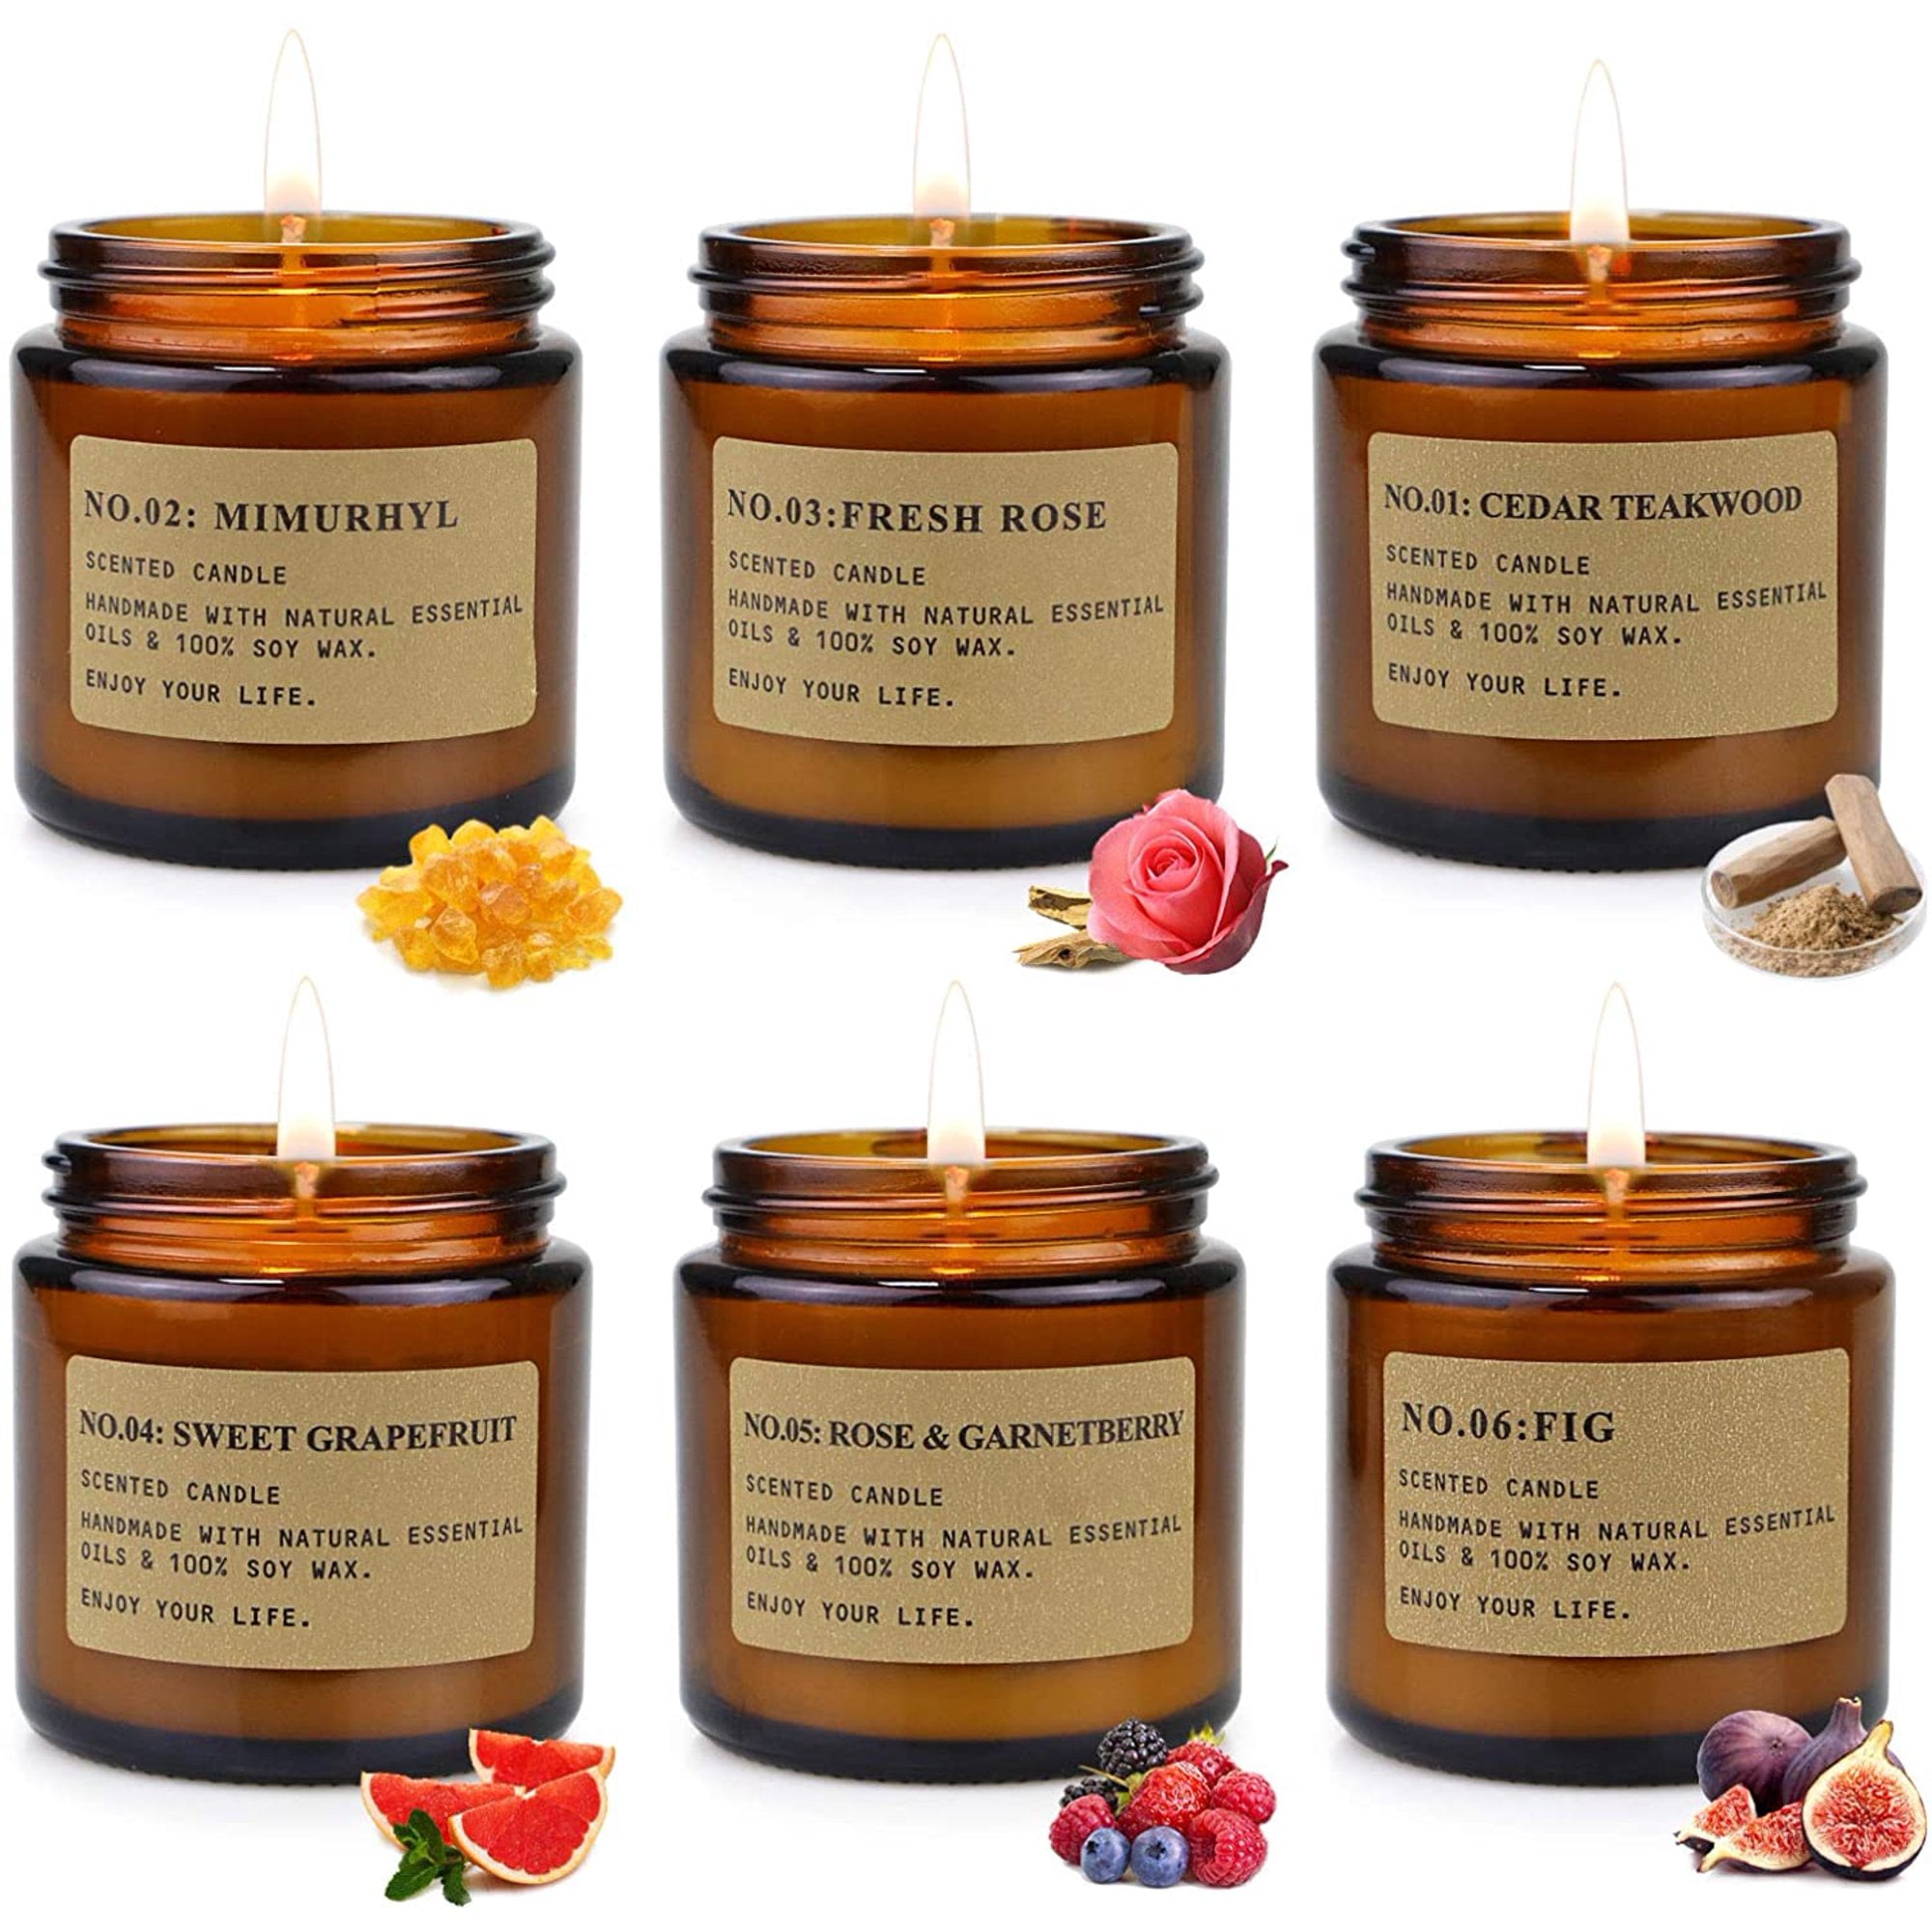 Nachy Scented Candles Gift Set for Women, 6 Pack 3.5 oz Candles Set, 150 Hours Long Burning Soy Wax Candles Jar Aromatherapy Candles for Stress Relief